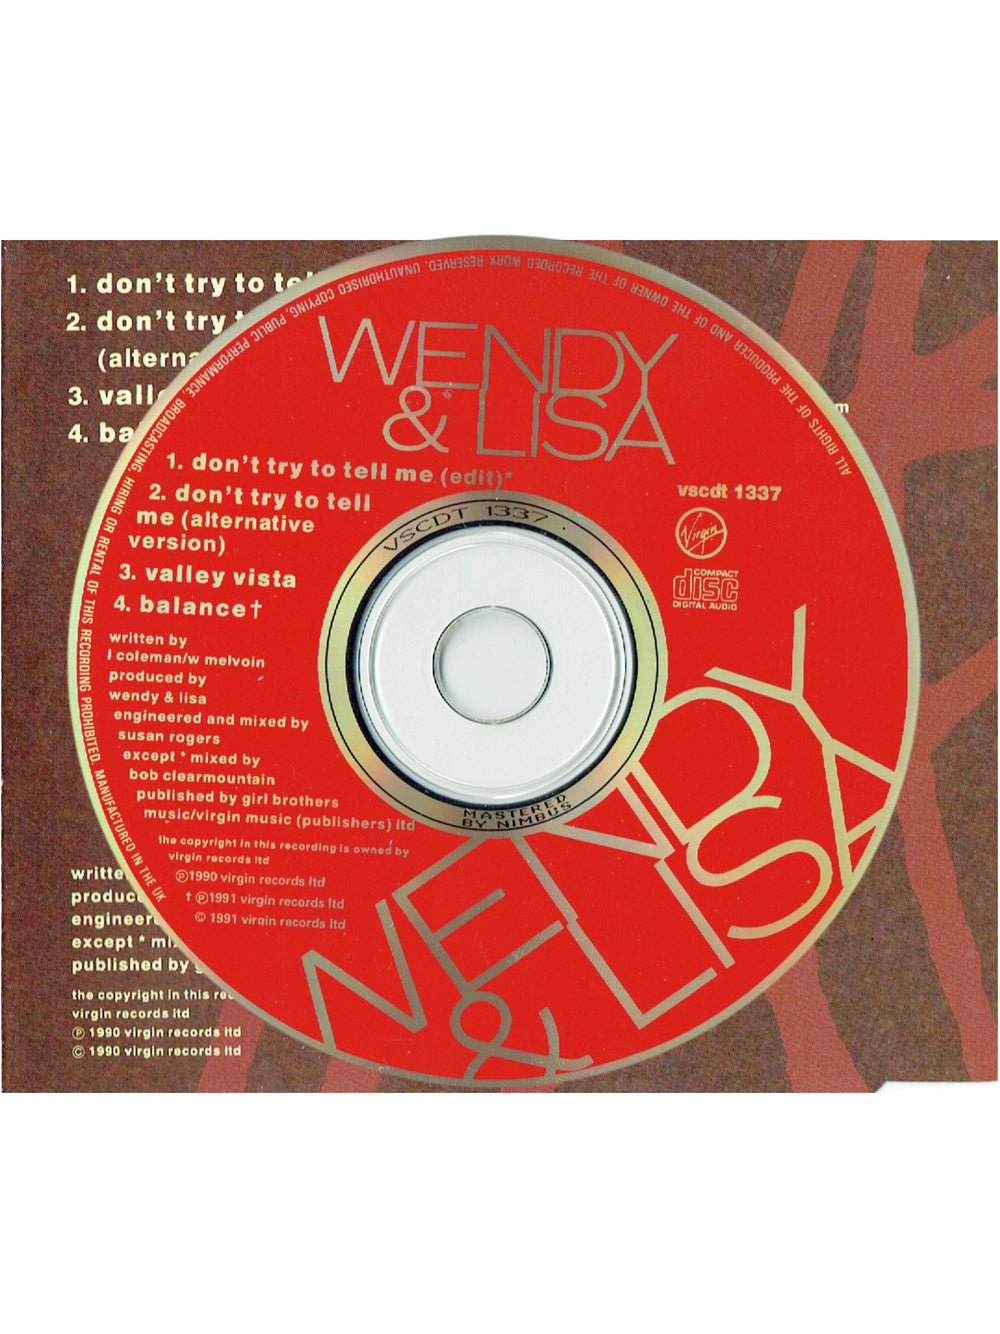 Prince – Wendy & Lisa Don't Try To Tell Me CD Single 1990 UK Release Eroica Prince